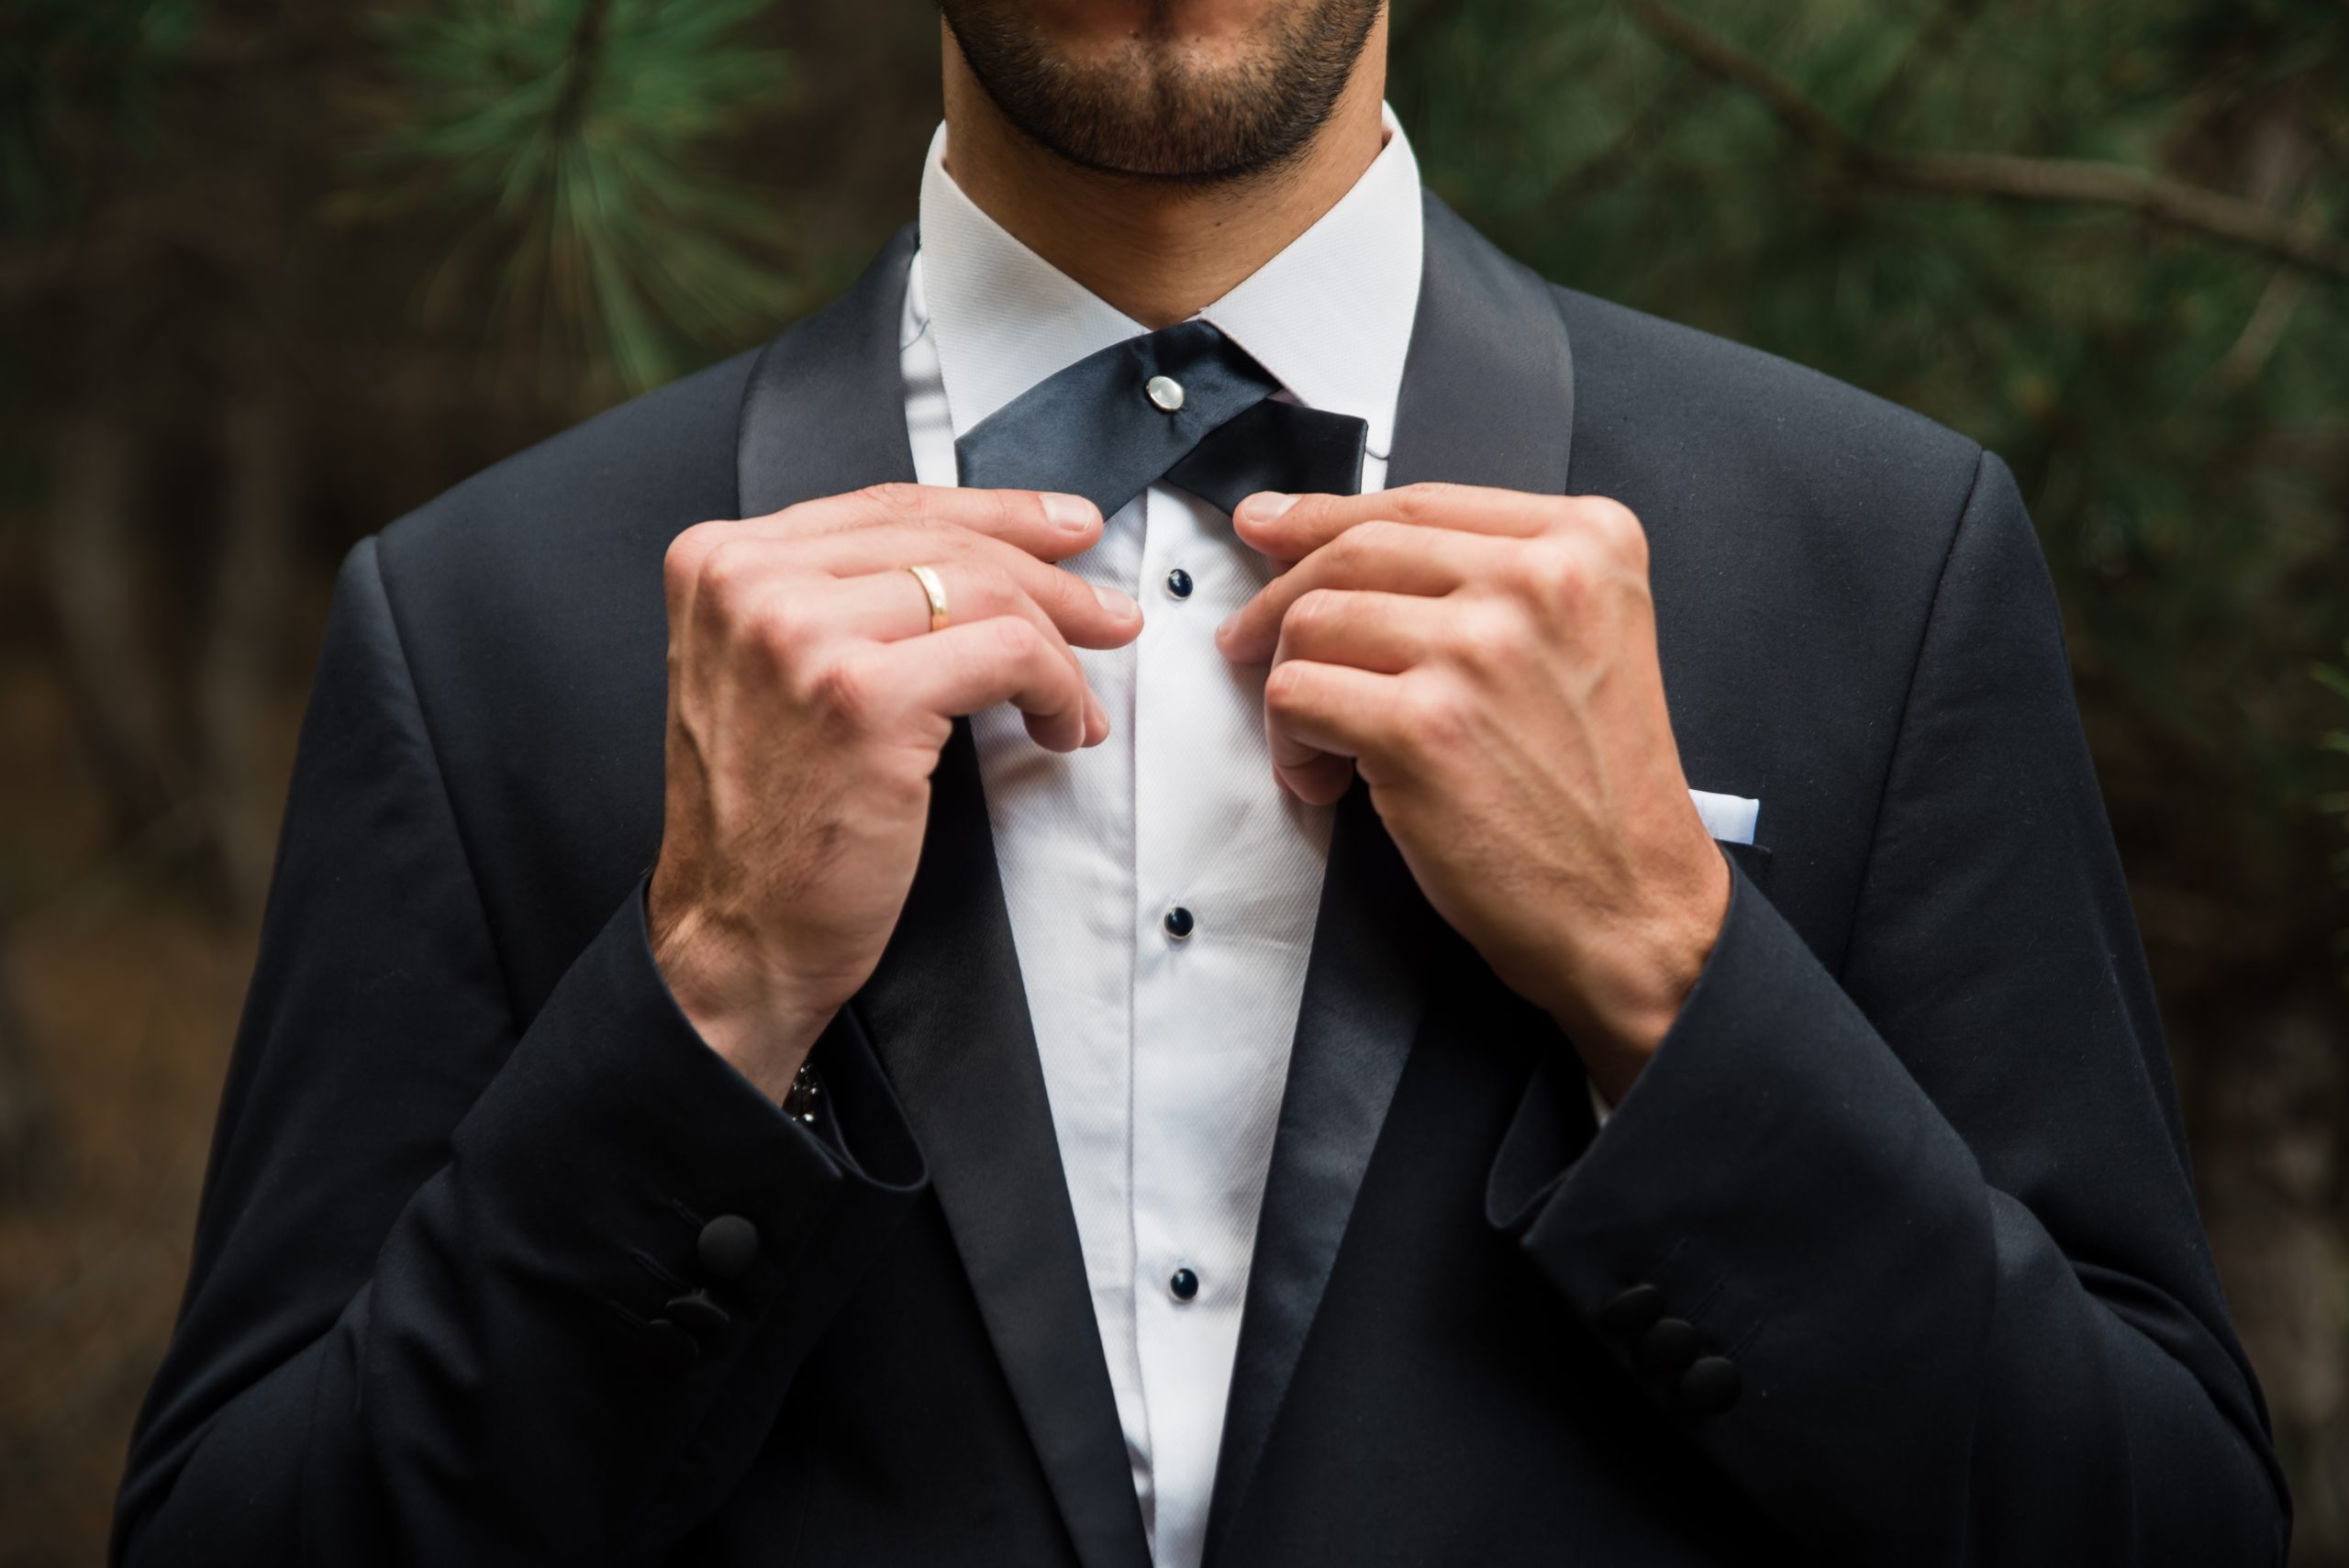 groom-at-wedding-tuxedo-in-the-forest-2023-11-27-05-21-55-utc-scaled